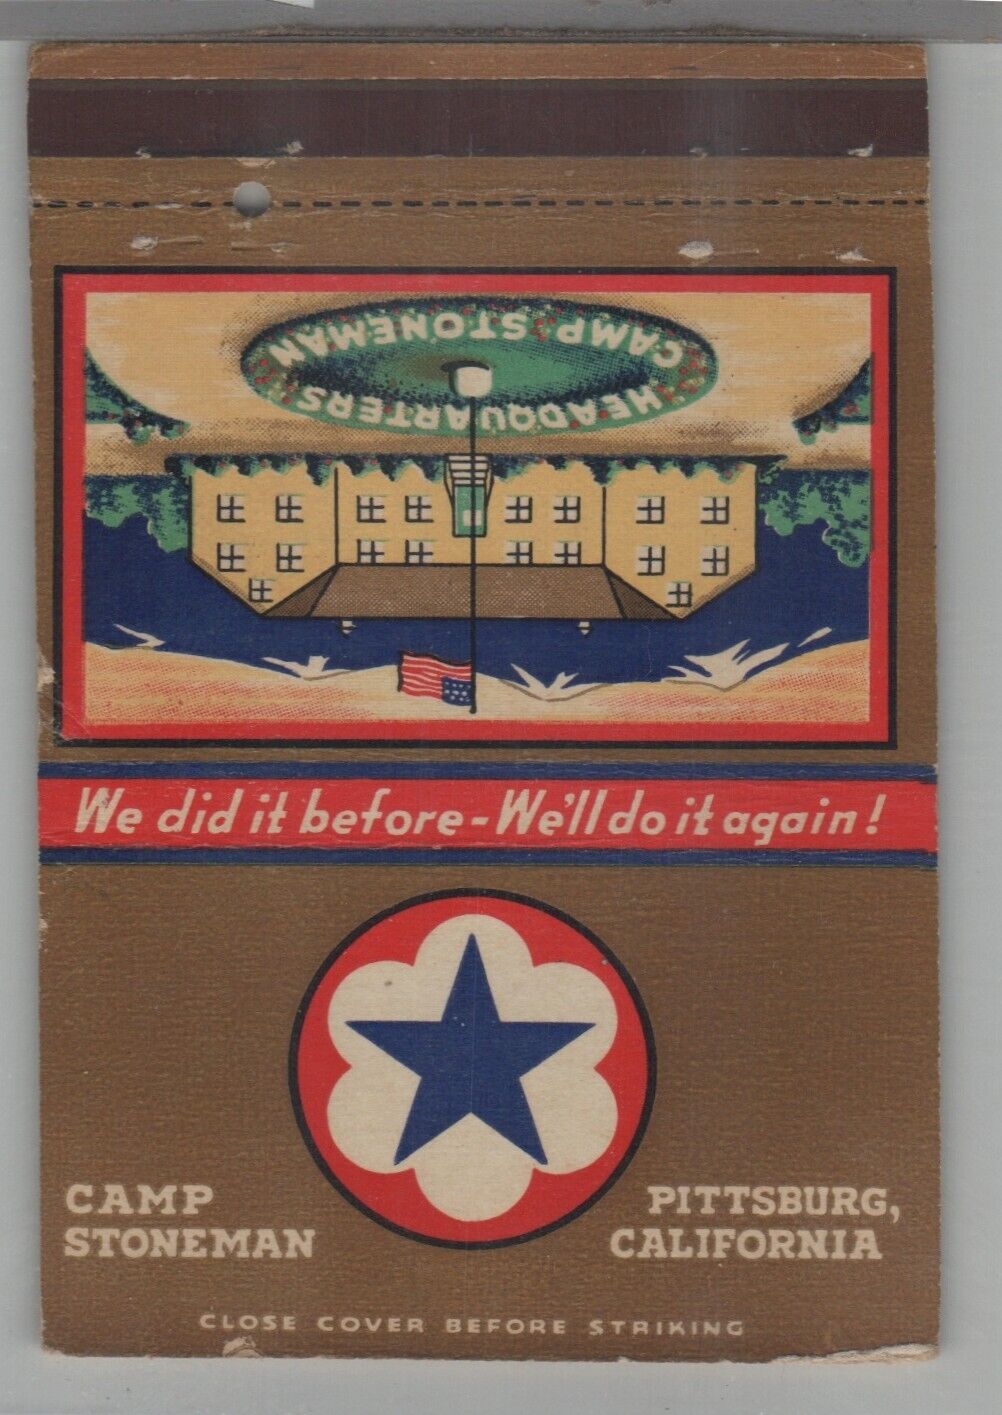 Matchbook Cover - Post Card - US Army Camp Stoneman Pittsburg, CA